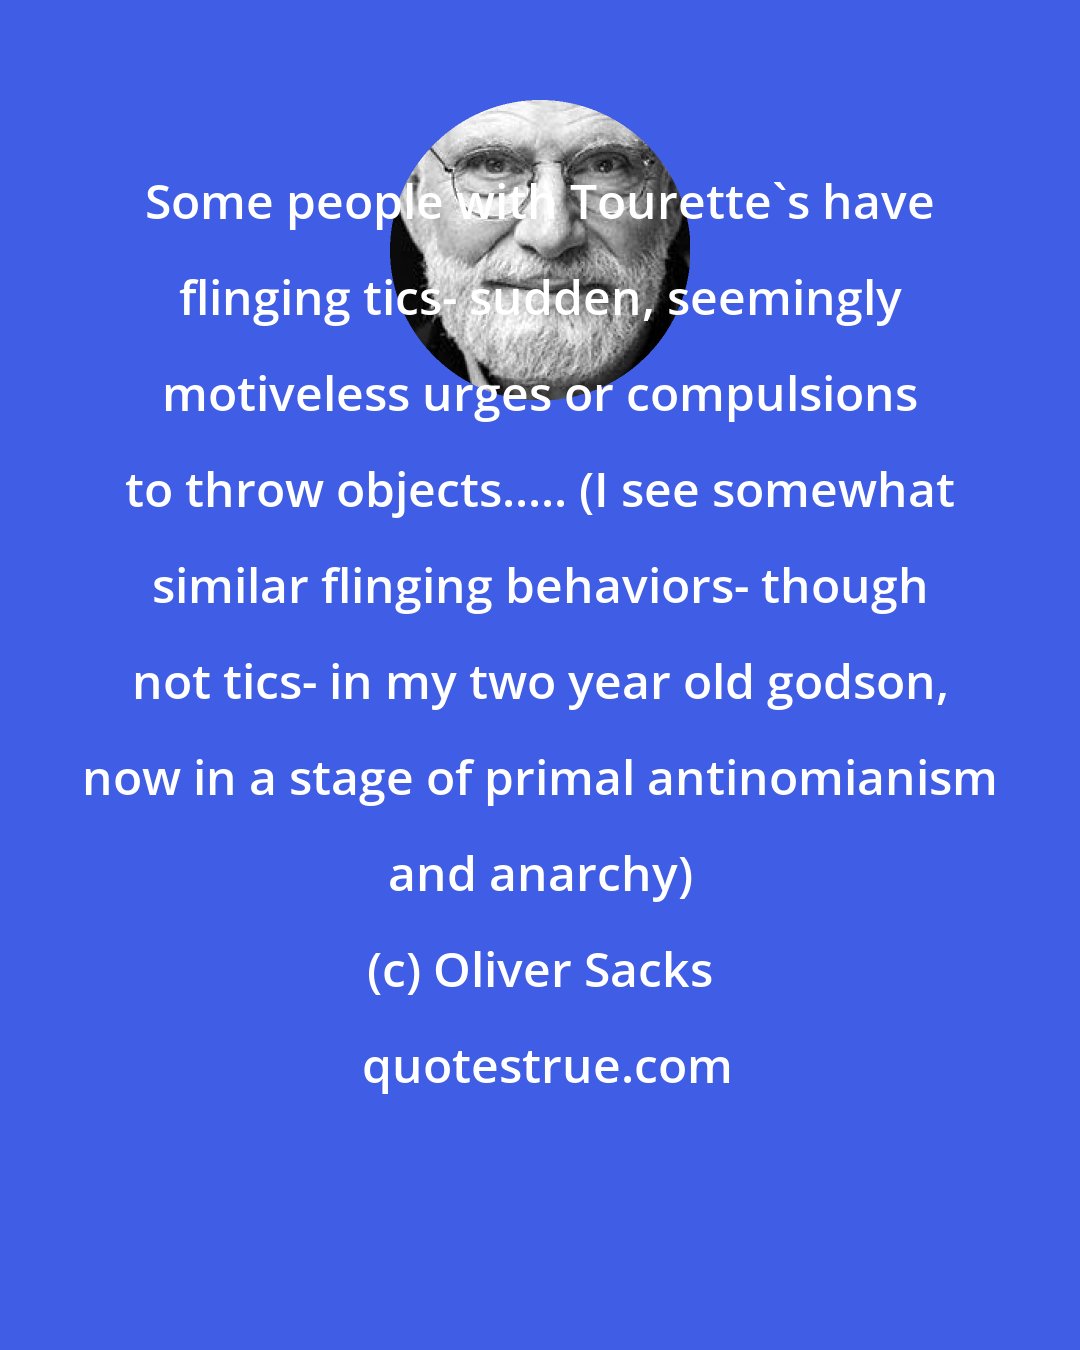 Oliver Sacks: Some people with Tourette's have flinging tics- sudden, seemingly motiveless urges or compulsions to throw objects..... (I see somewhat similar flinging behaviors- though not tics- in my two year old godson, now in a stage of primal antinomianism and anarchy)